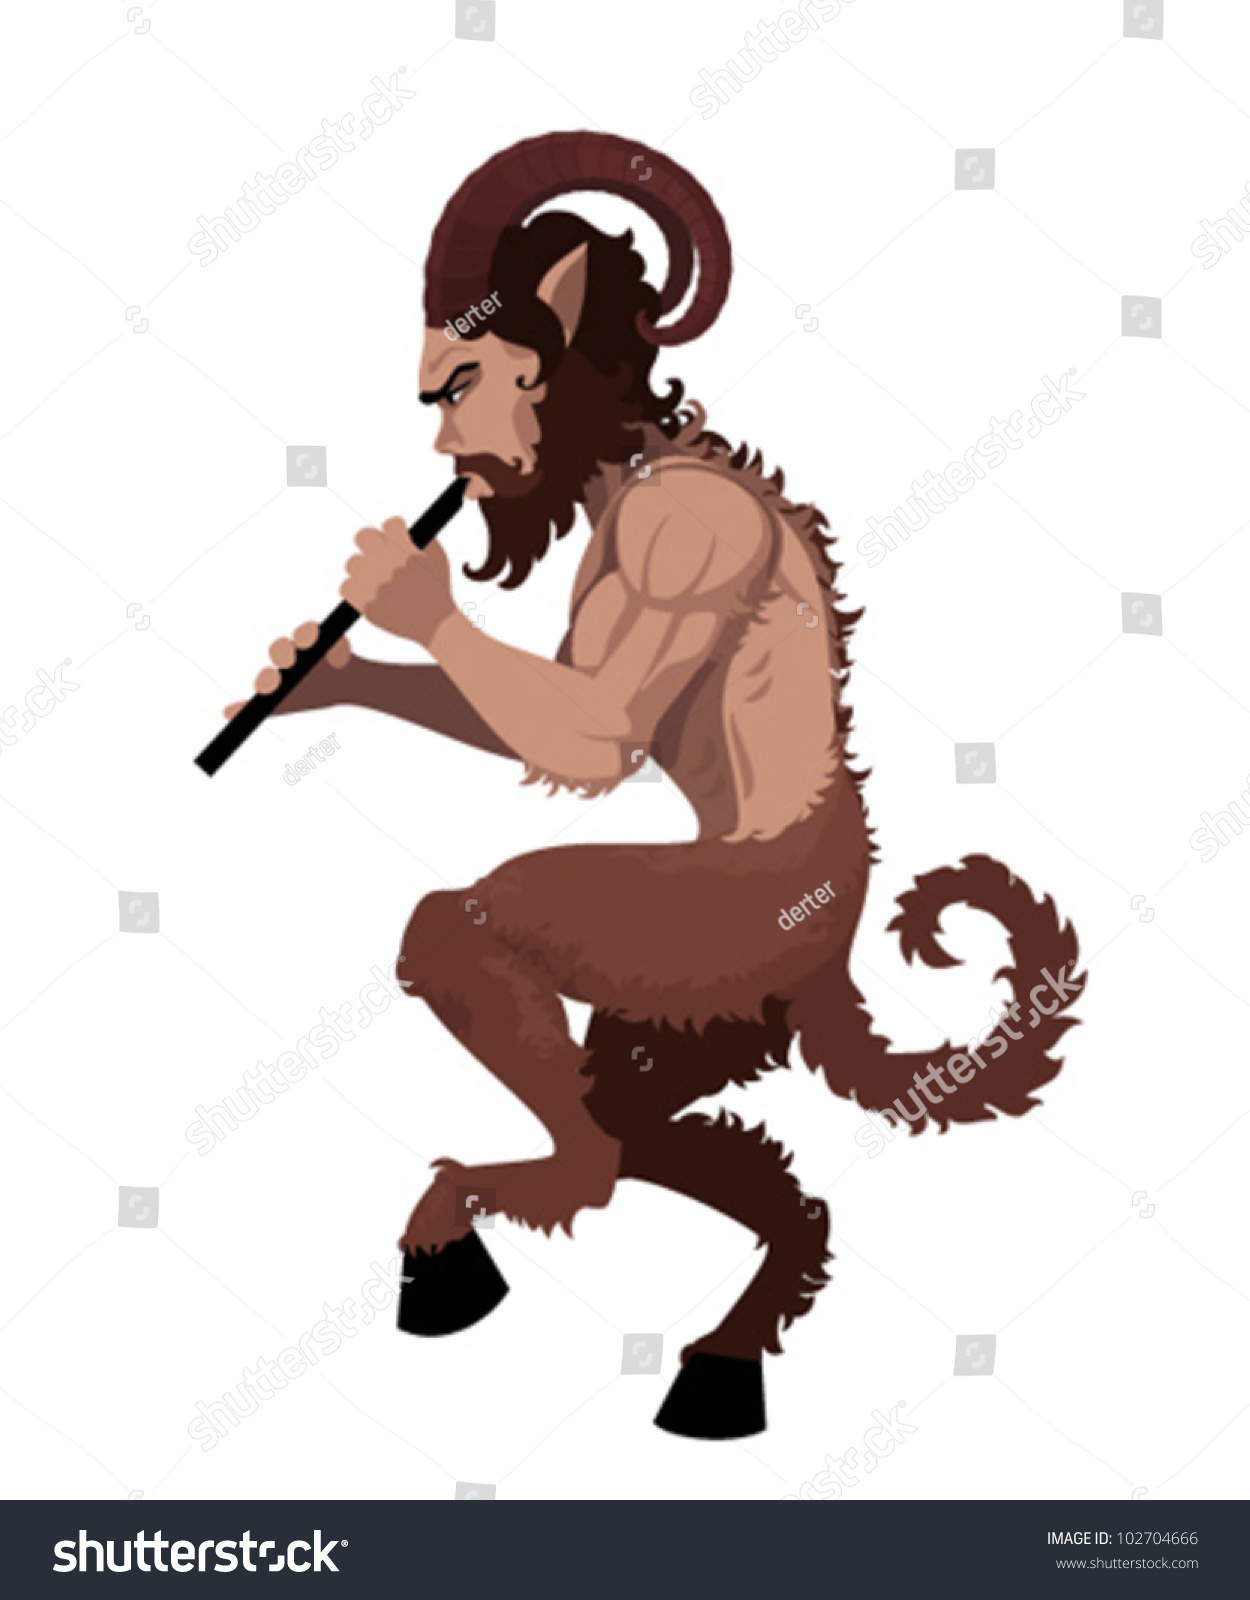 Image result for satyr